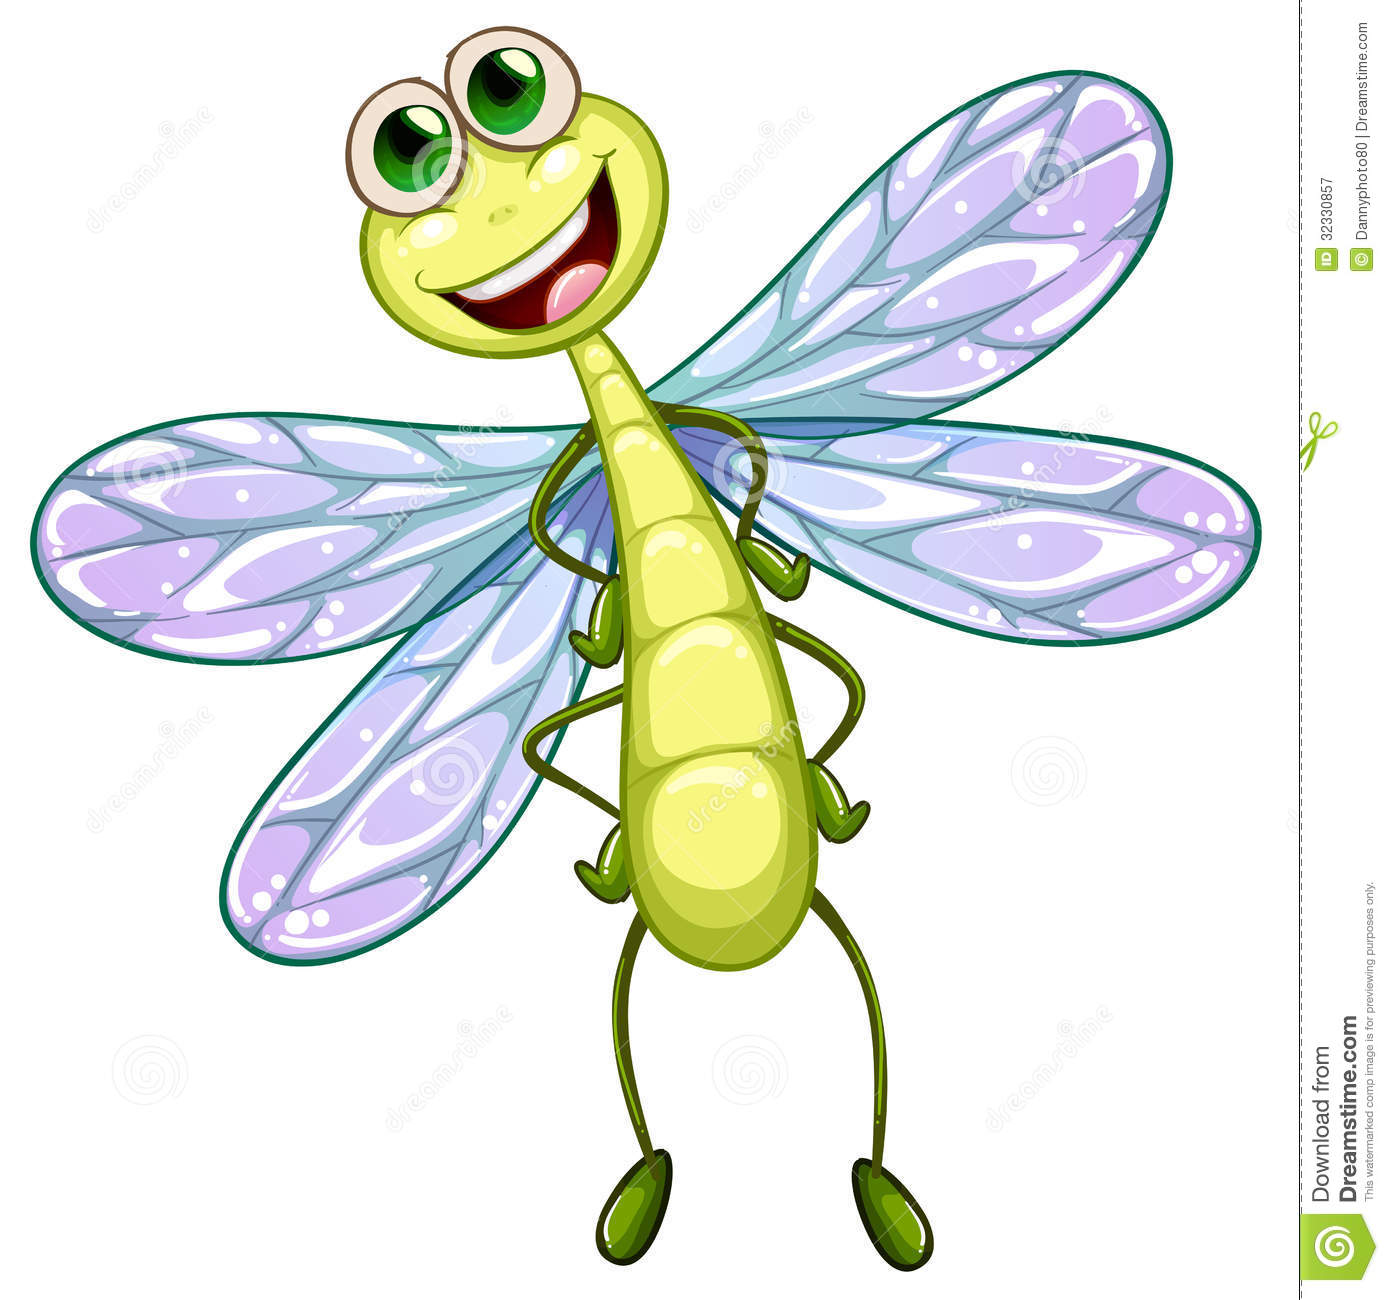 Smiling Dragonfly Royalty Free Stock Photography   Image  32330857